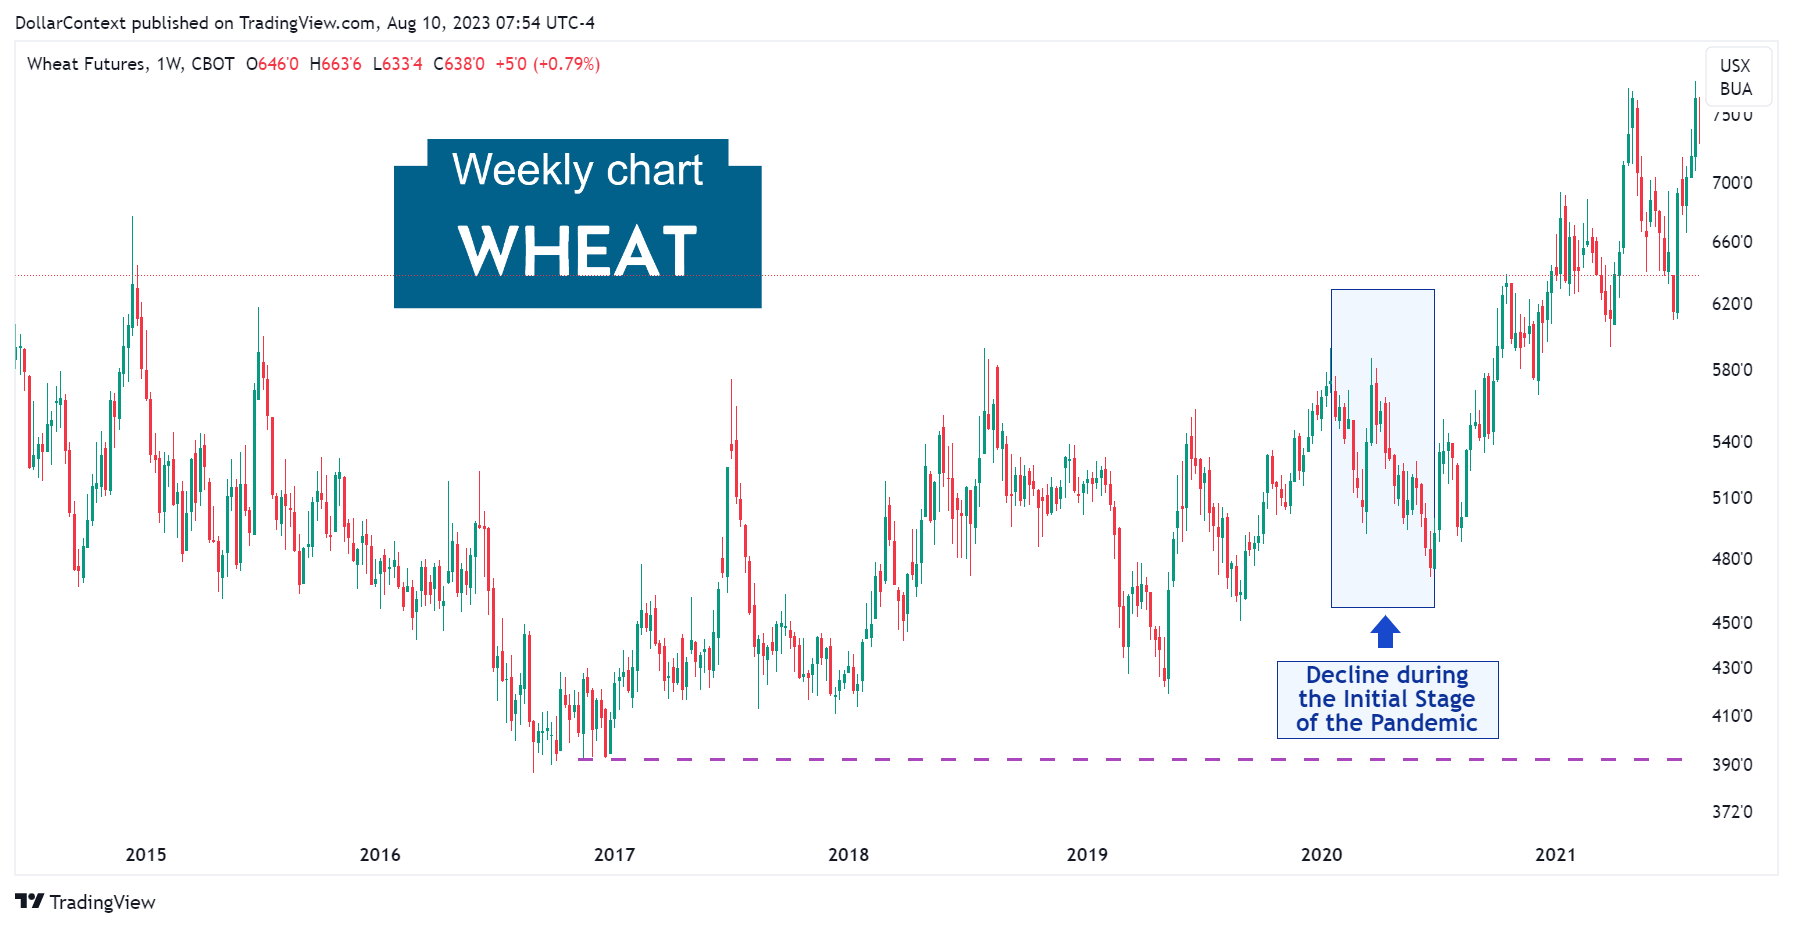 Trading Range of the Wheat Market Through the Pandemic